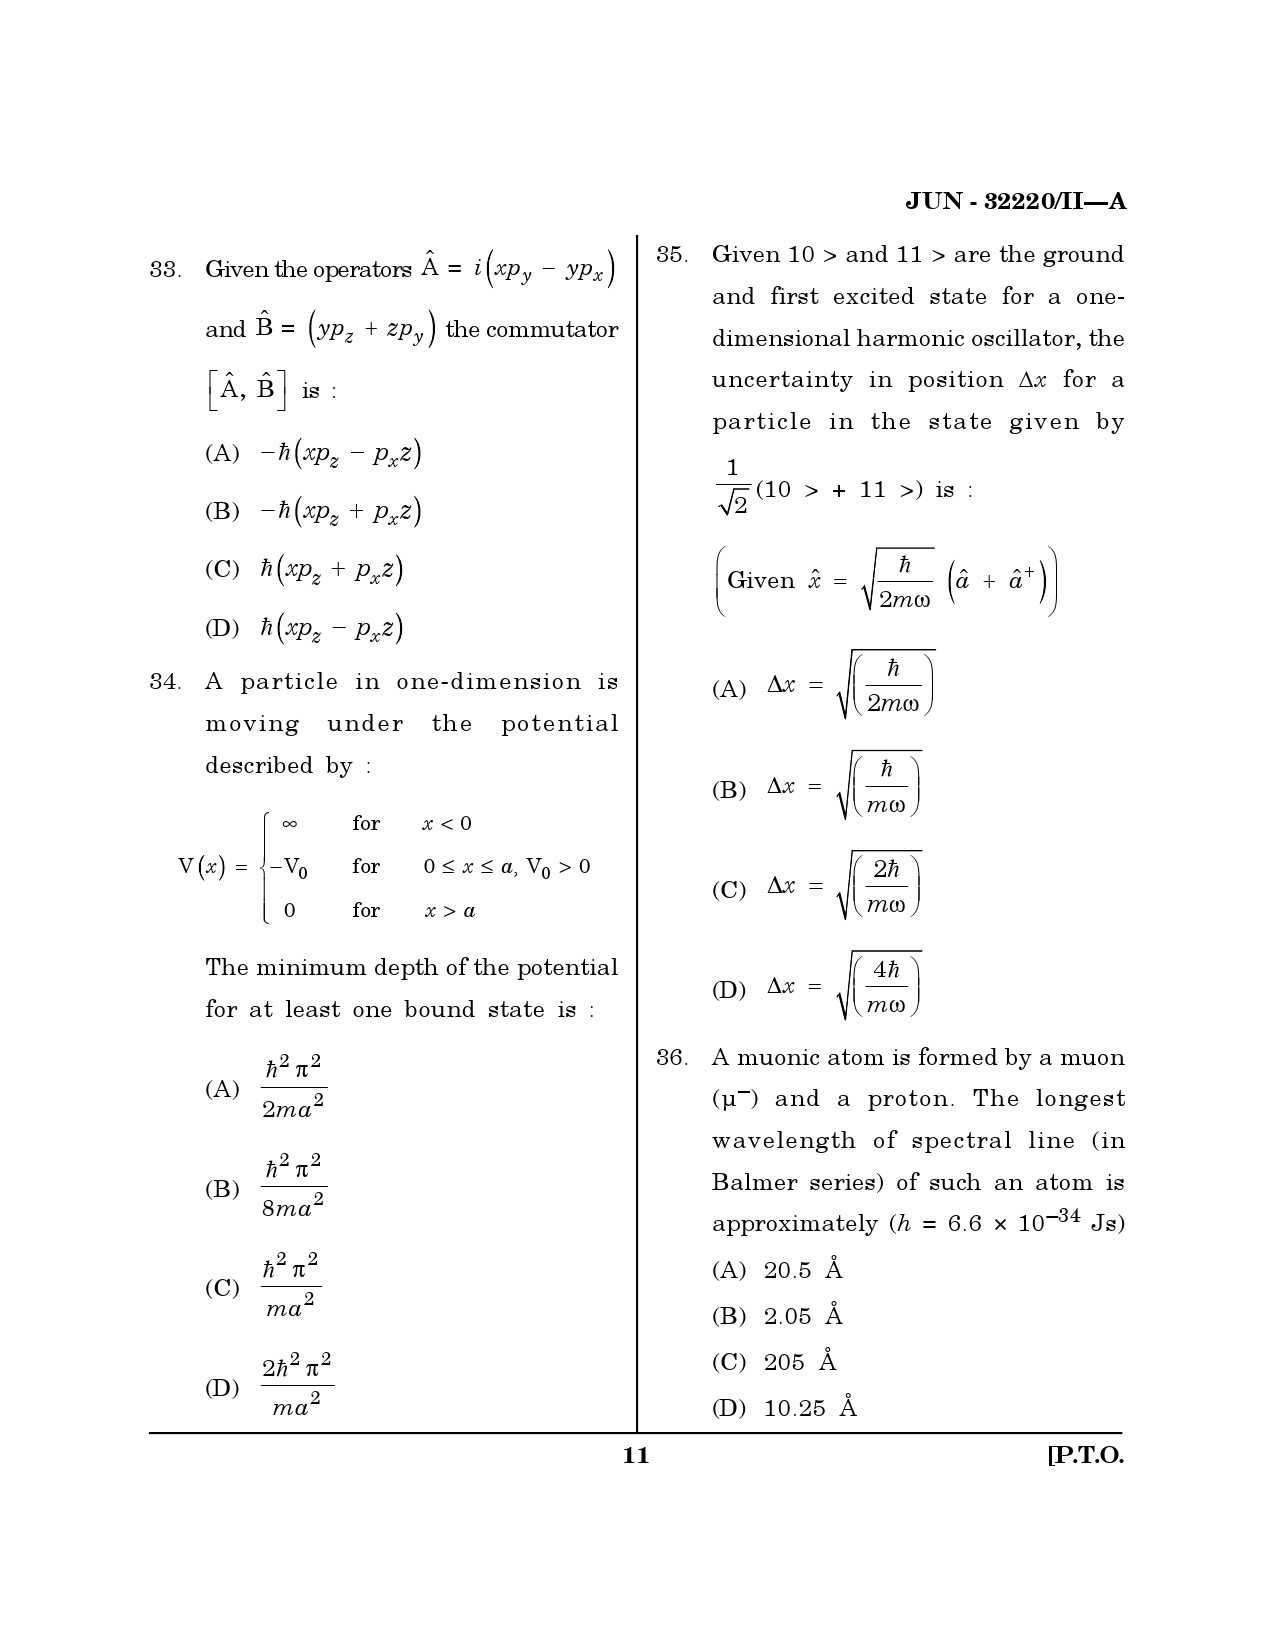 Maharashtra SET Physical Science Question Paper II June 2020 10